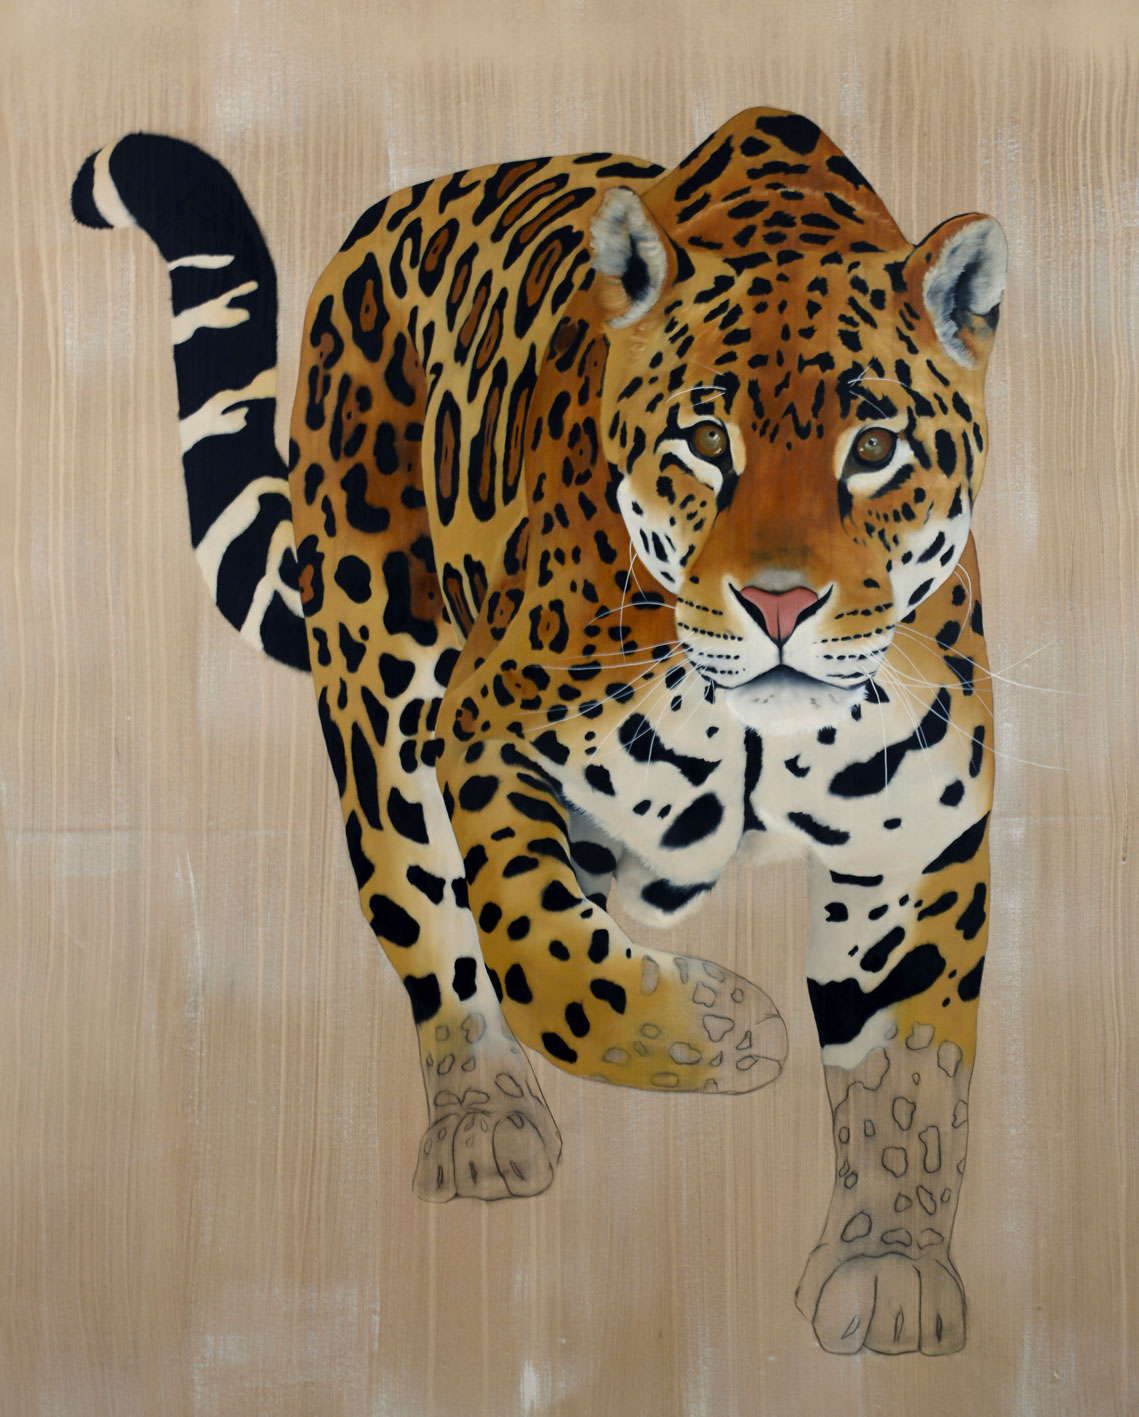 PANTHERA ONCA panthera-onca-jaguar-delete-threatened-endangered-extinction- Thierry Bisch Contemporary painter animals painting art decoration nature biodiversity conservation